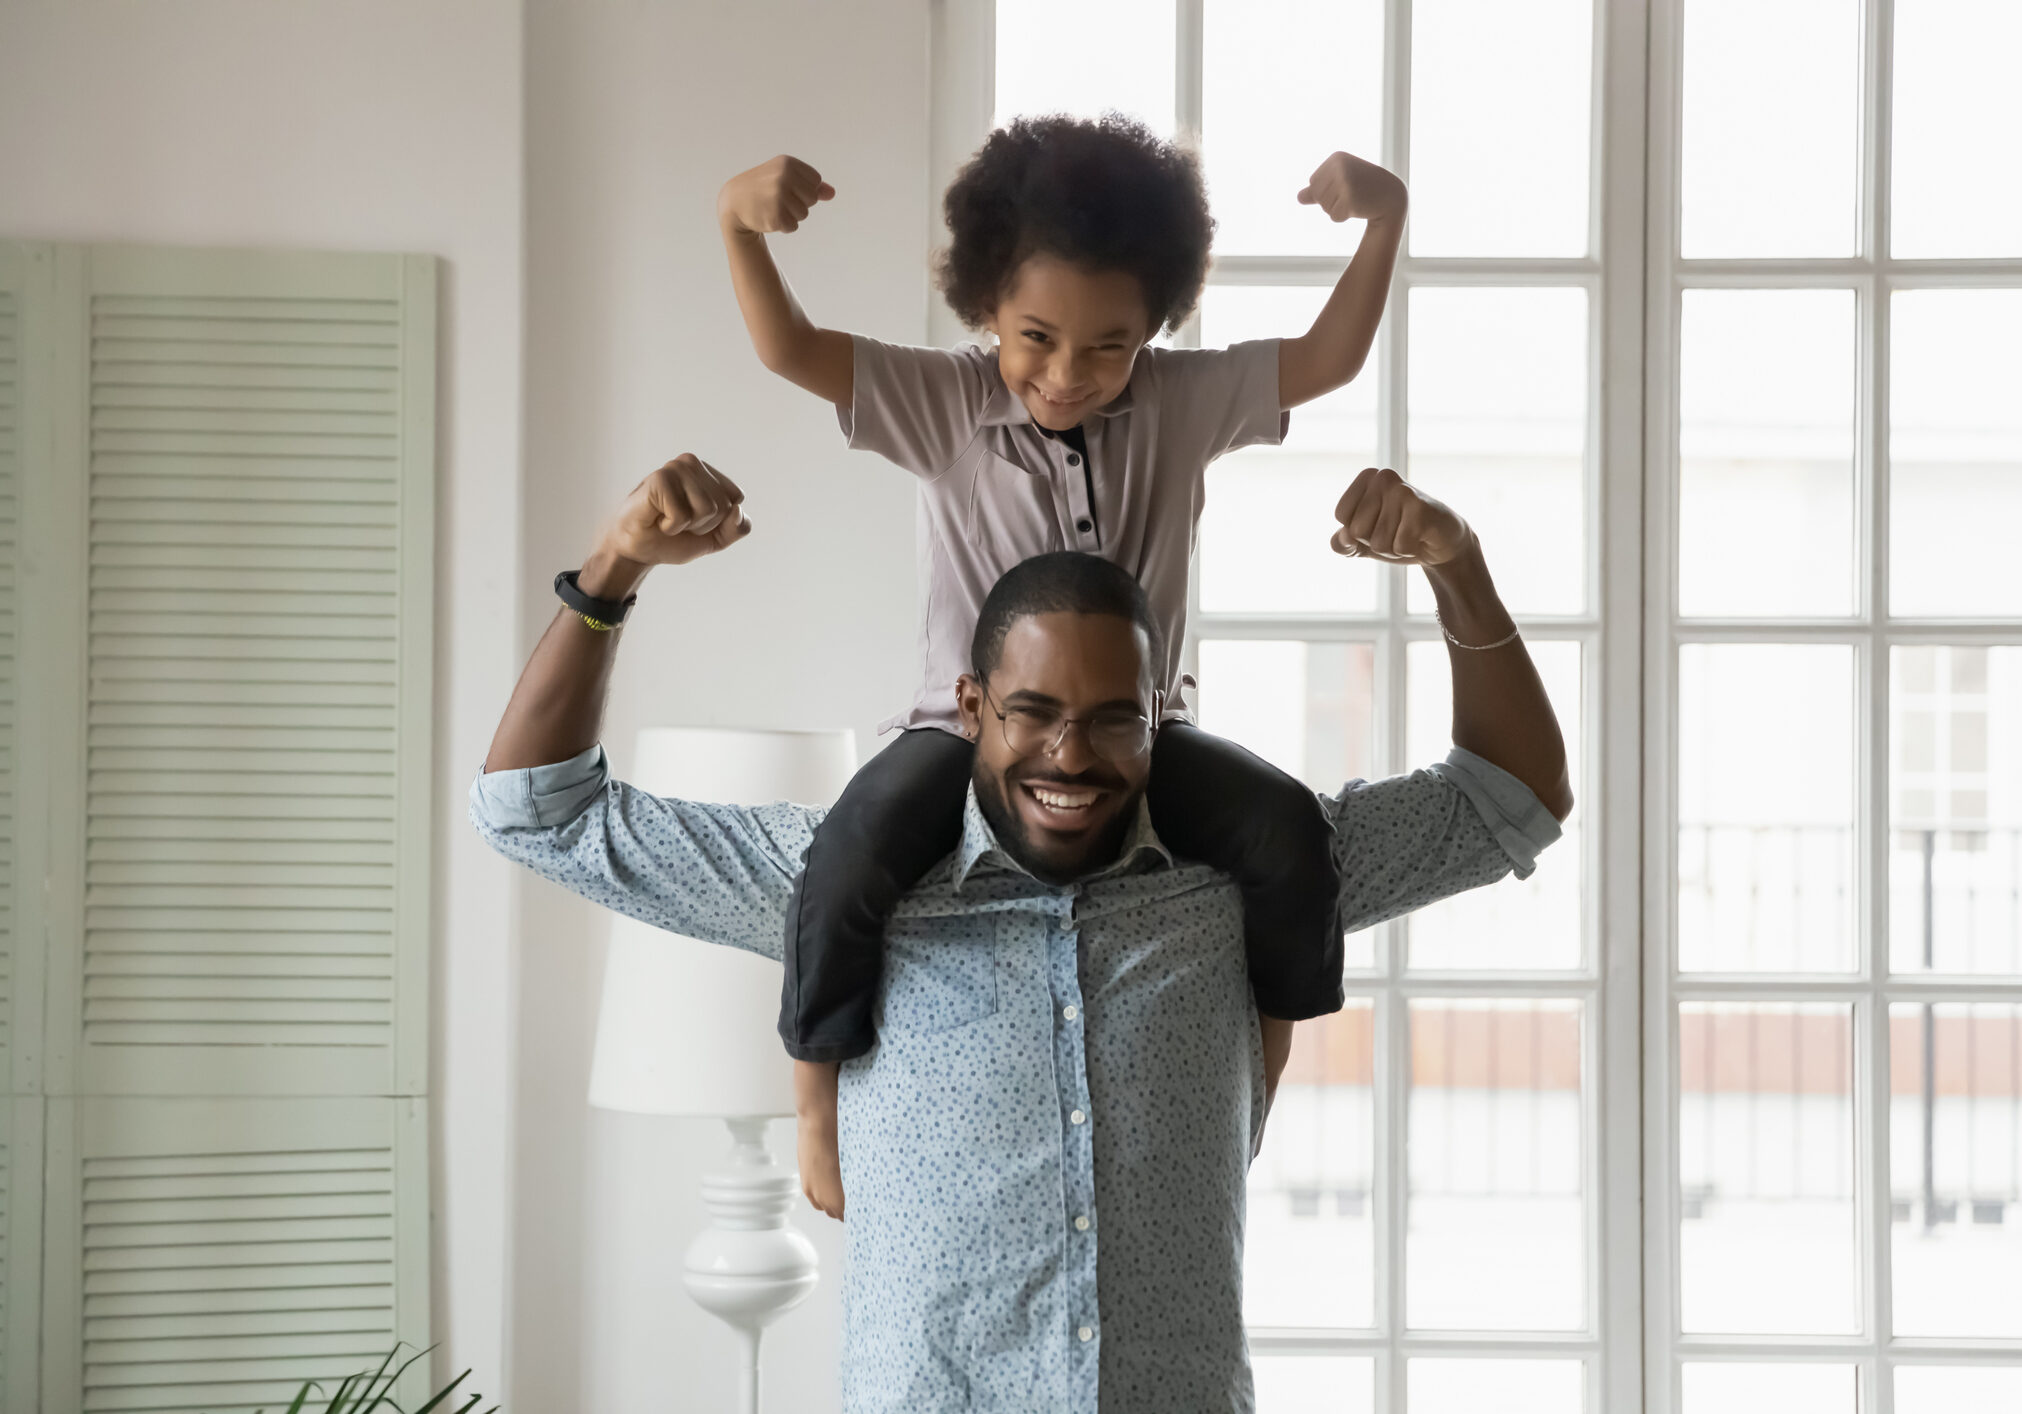 Small son sit on strong dad shoulders showing biceps. African family enjoy activity games at home, healthy fit lifestyle, two superheroes, vitamins for adults and children ad, happy Father Day concept